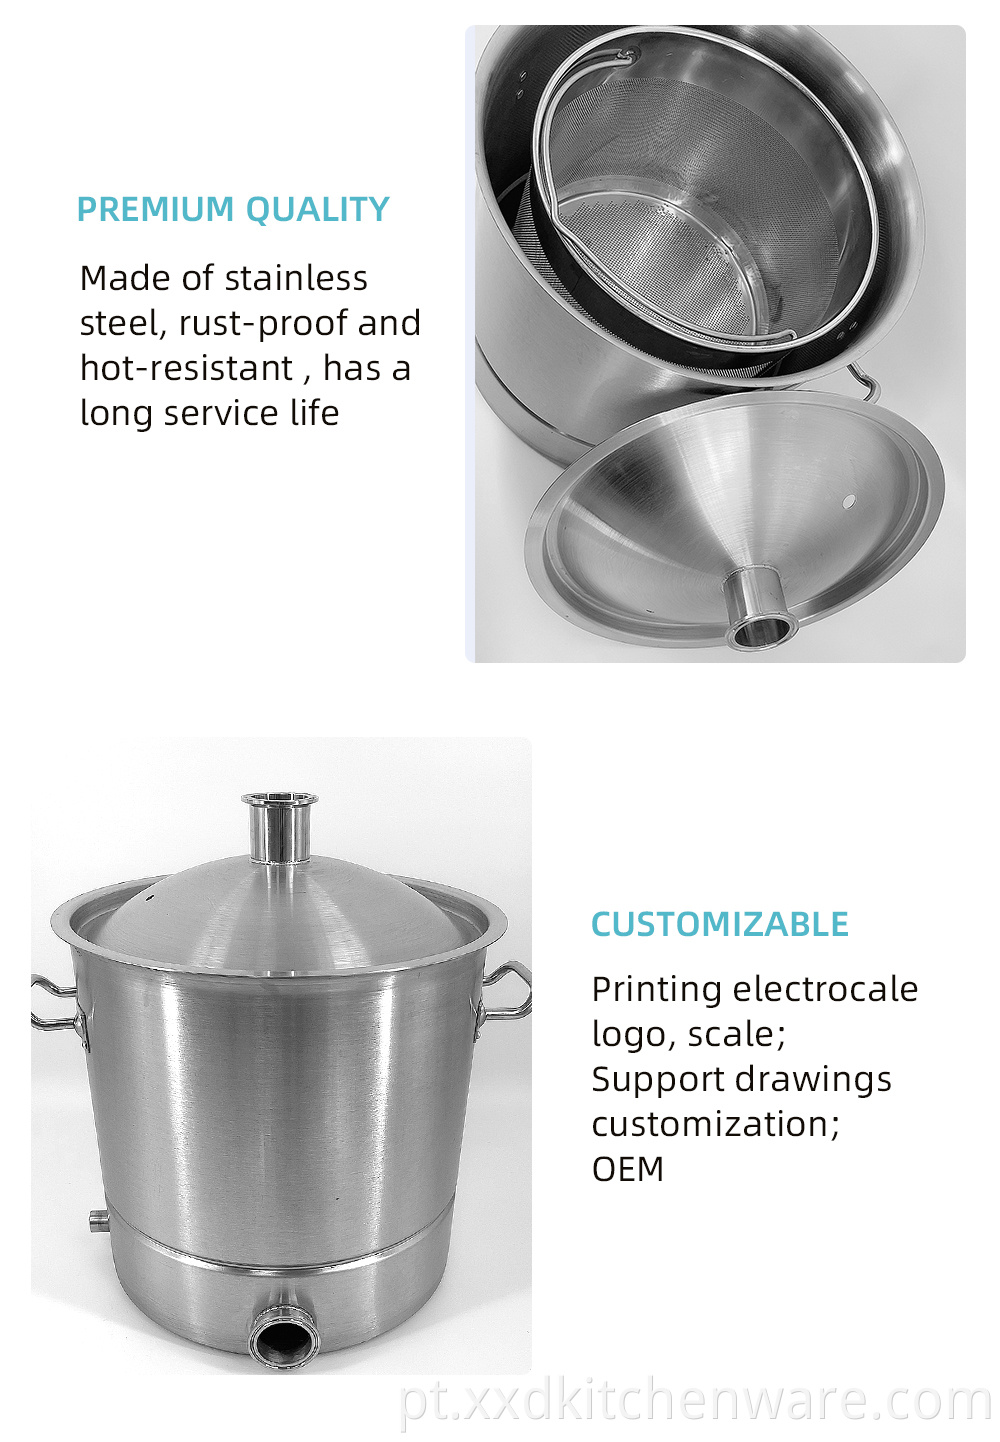 Thick Stainless Steel Beer Barrel Cookware Sets